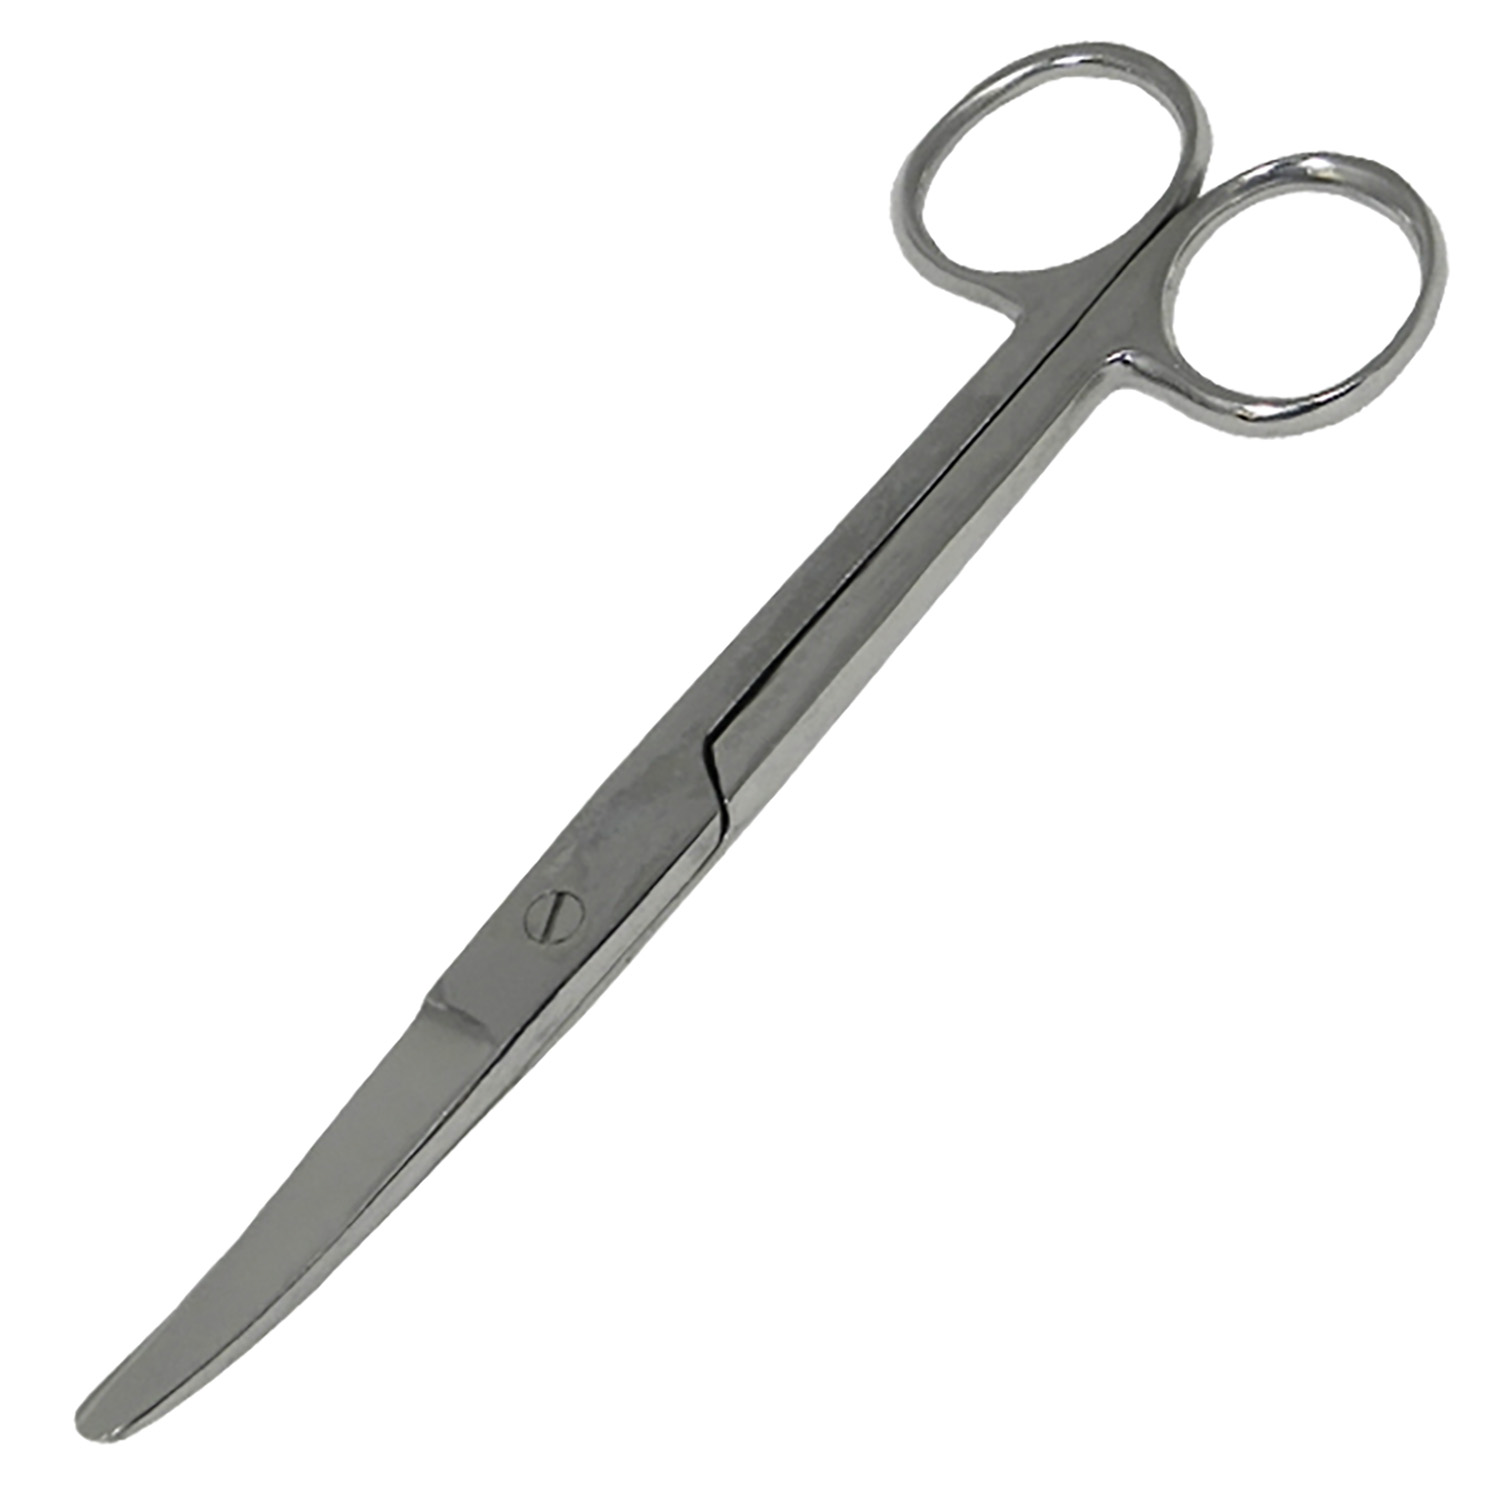 SMART GROOMING SCISSORS CURVED TRIMMING